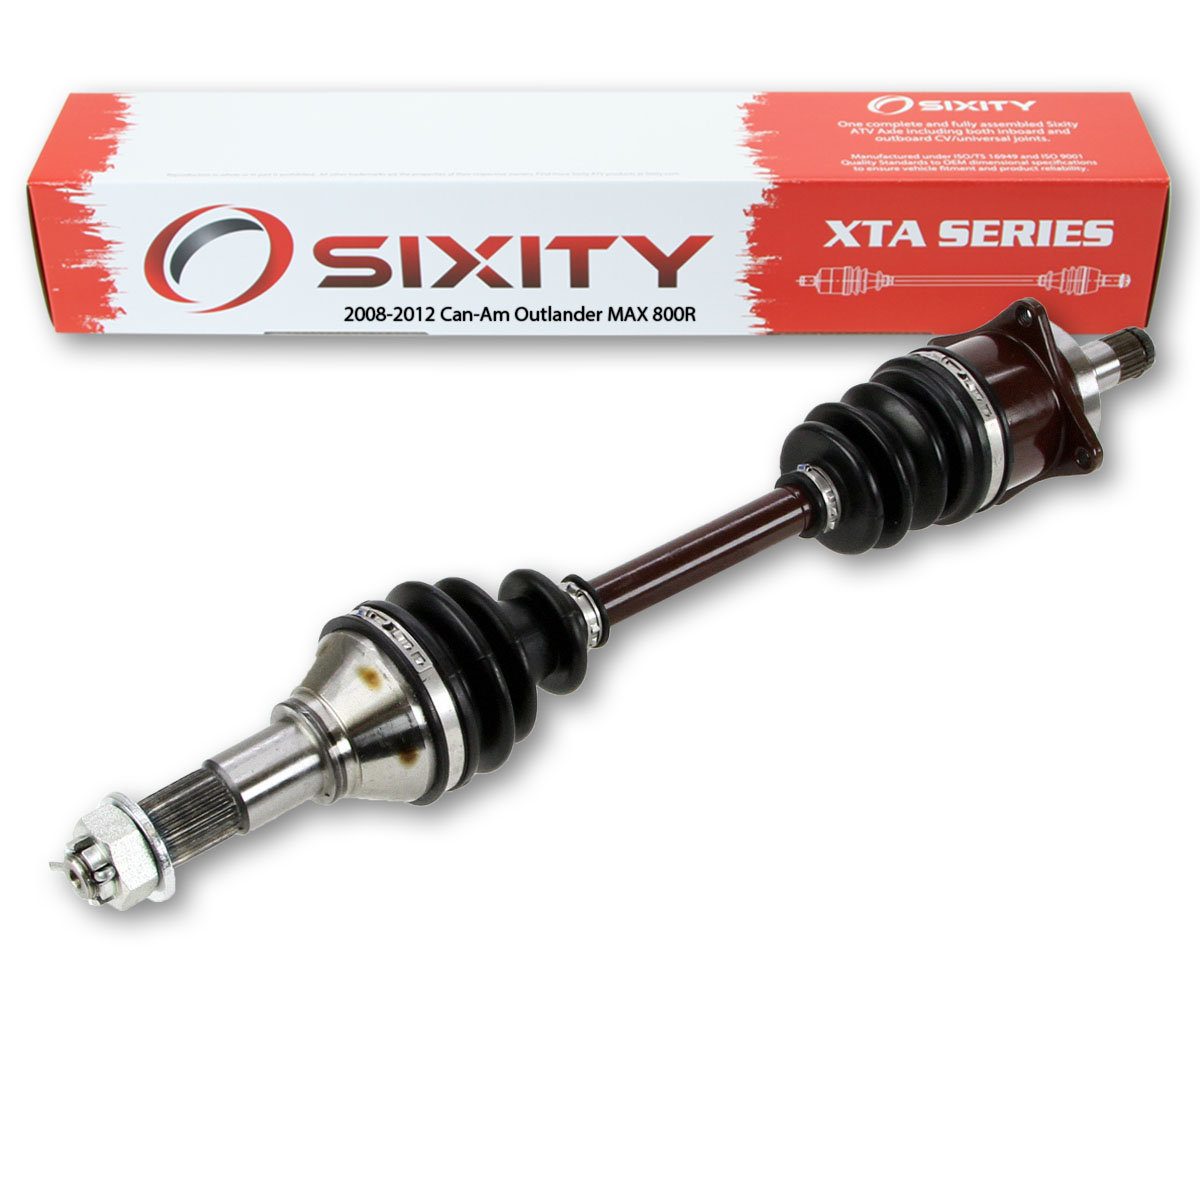 Sixity 2012 Can-Am Outlander MAX 800R 4X4 Front Left XTA ATV Axle